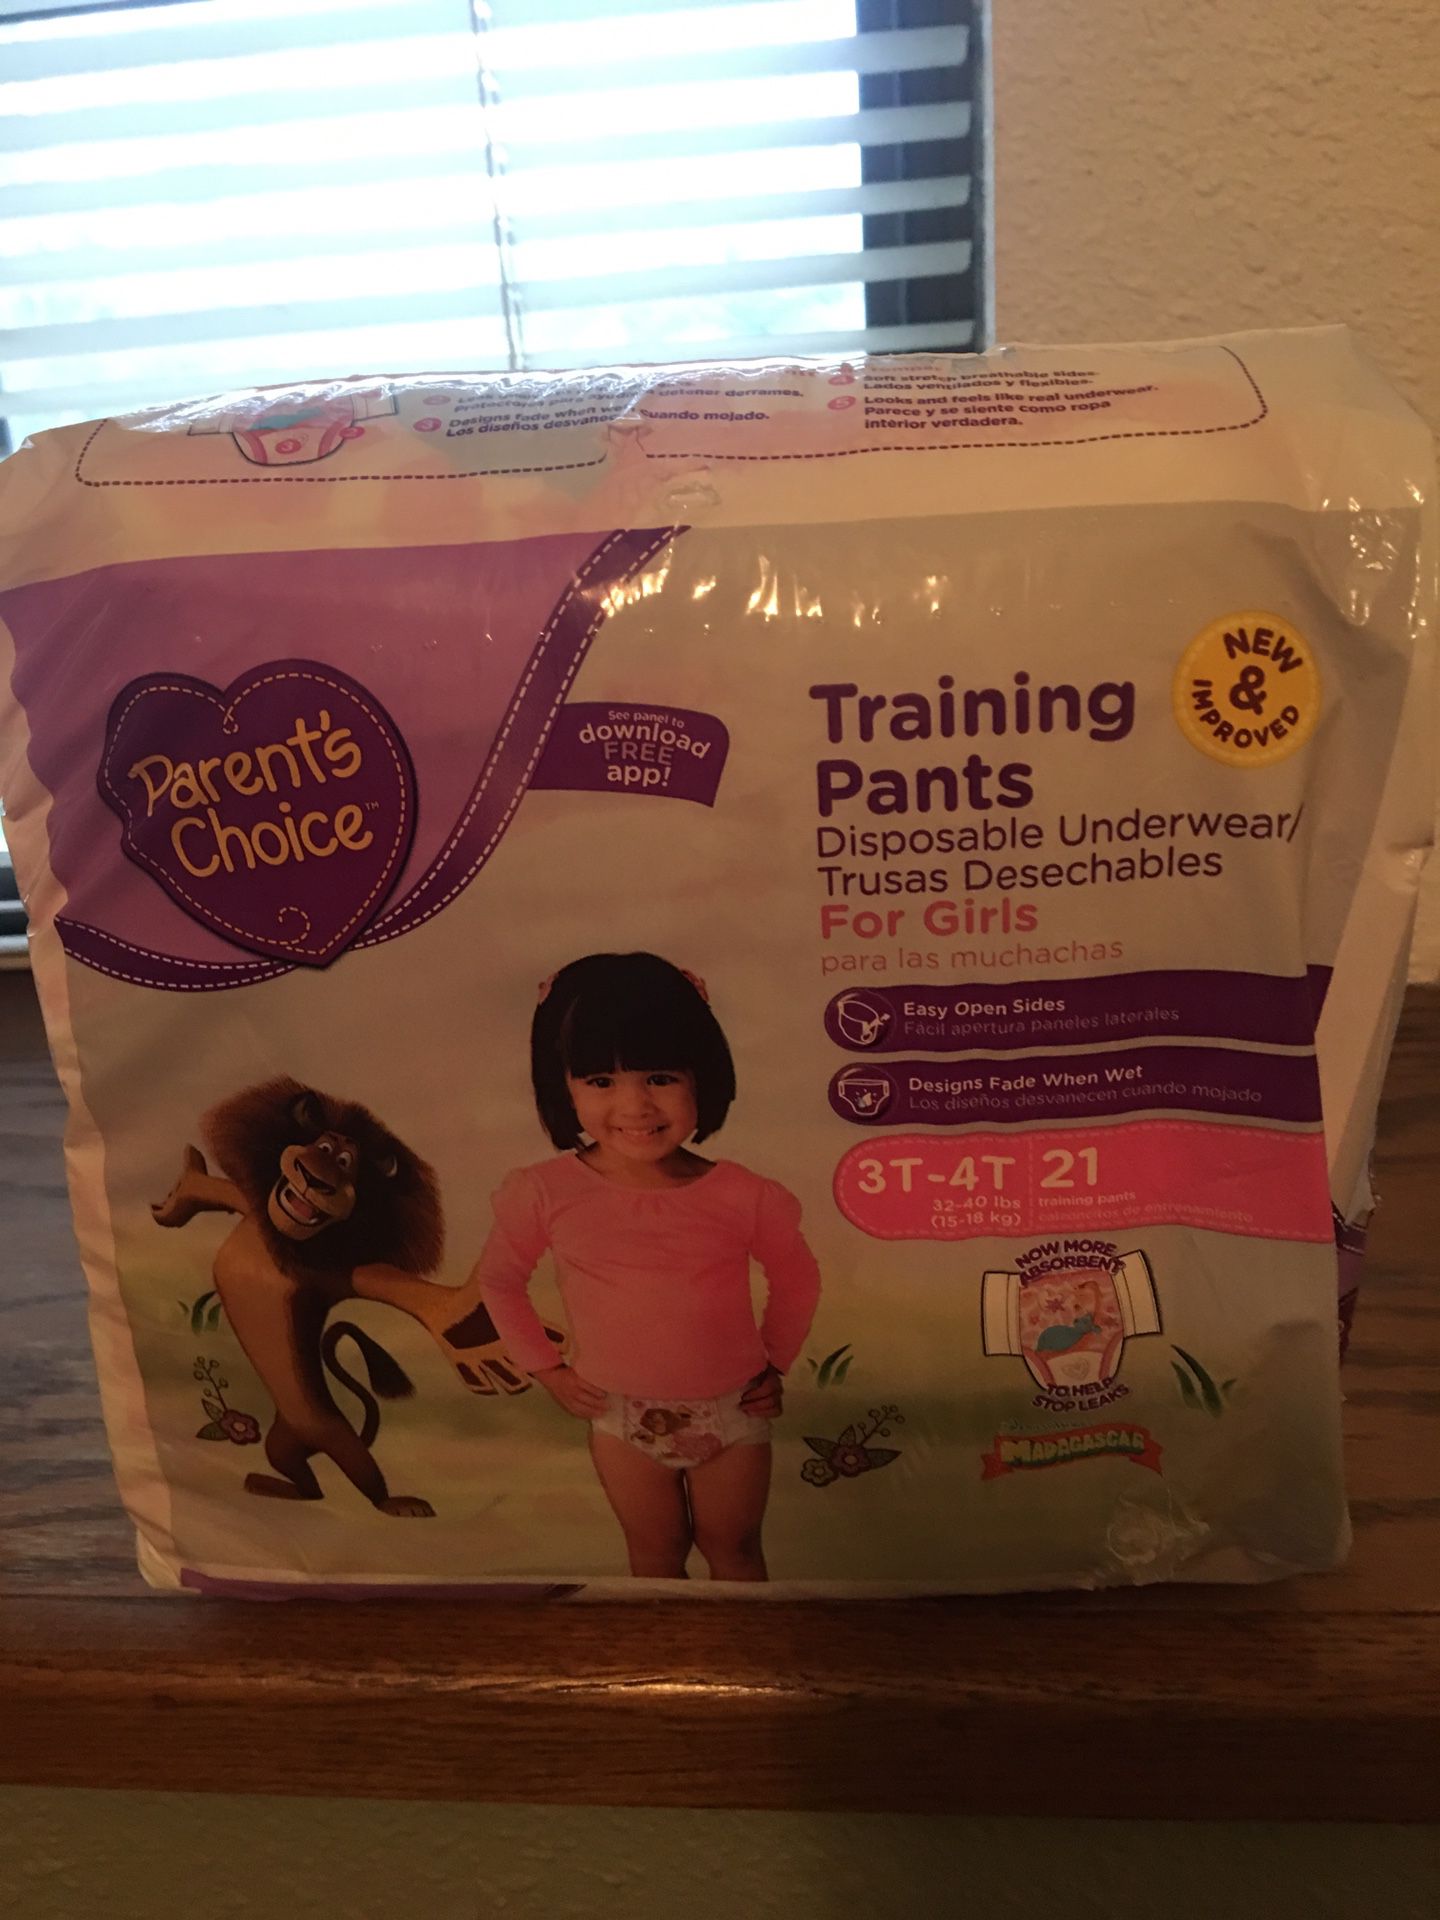 Parents choice girl training pants 3t/4t 21 count for Sale in